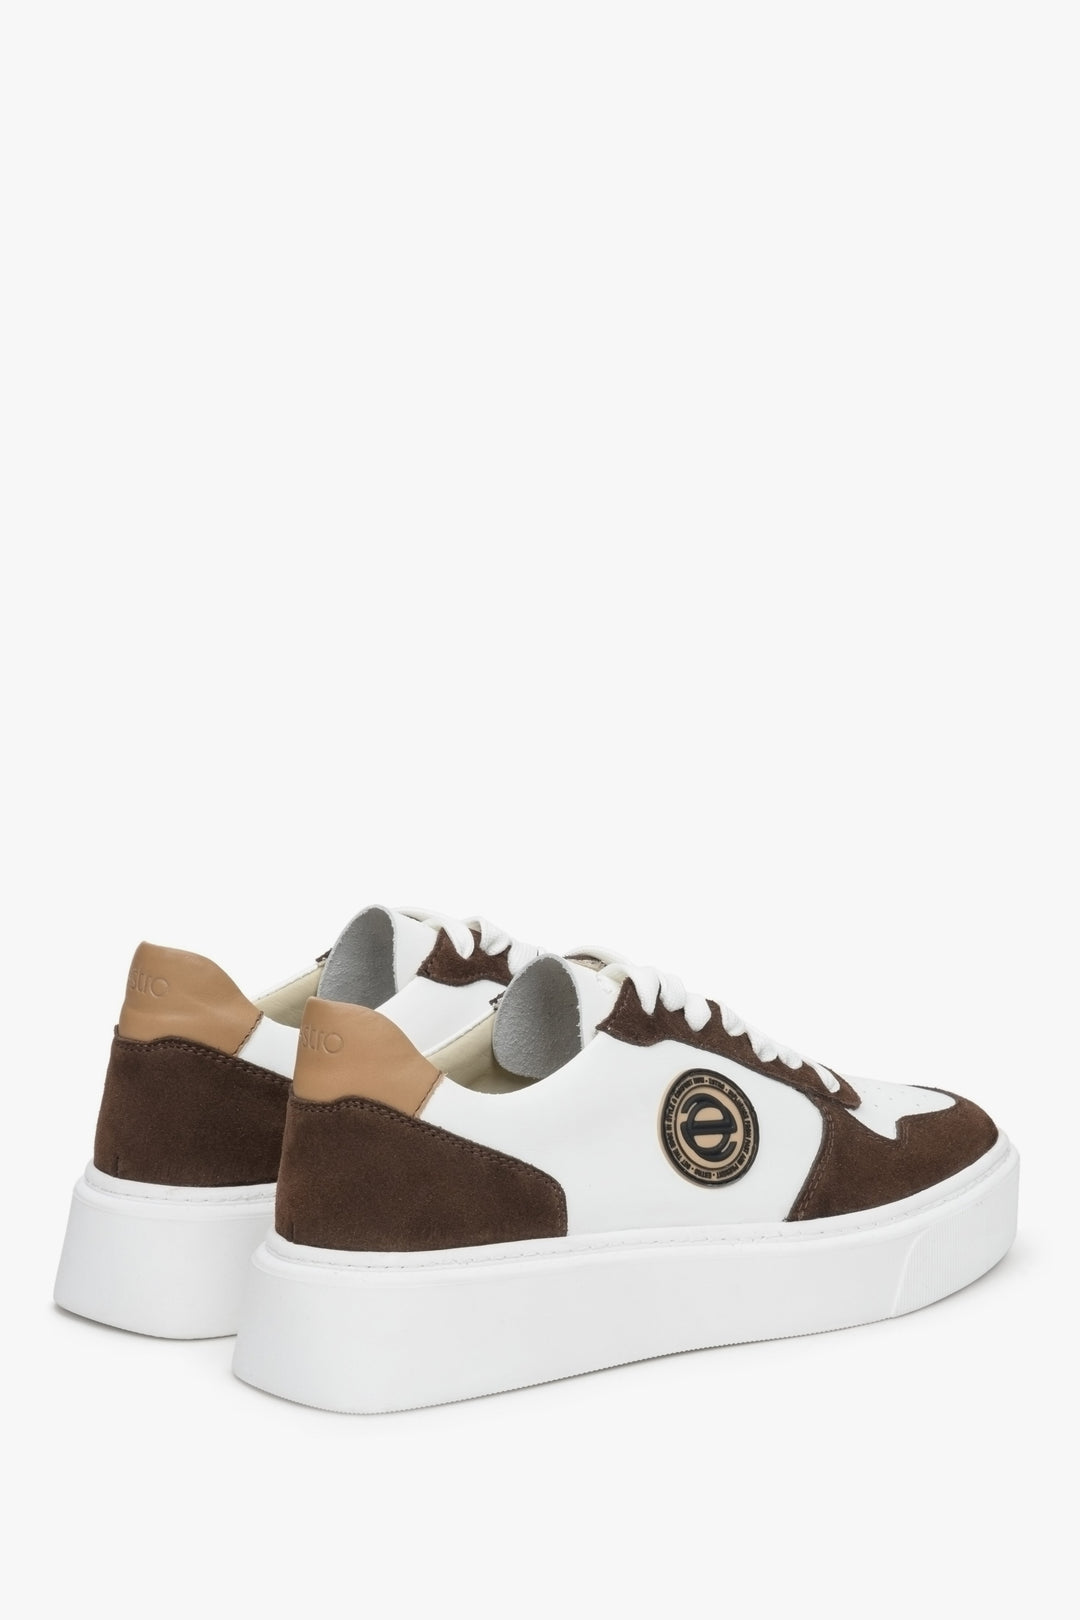 White and brown soft and comfortable Estro women's sneakers in leather and velour - close-up of the side seam and heel counter.